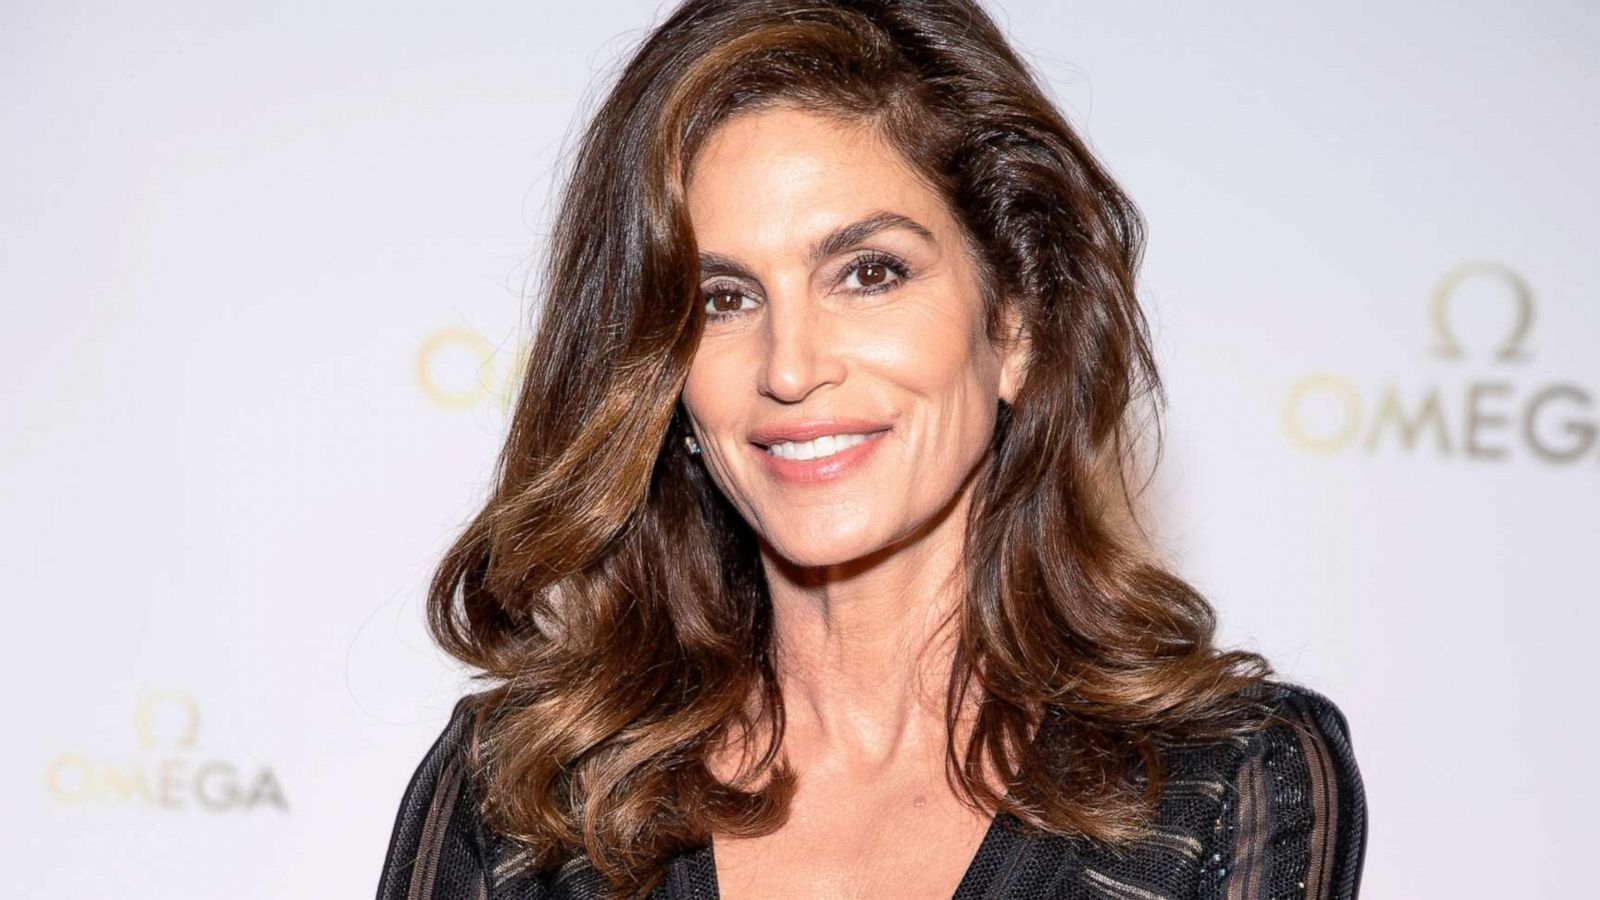 Cindy Crawford's Daughter Told Her to 'Redo' Her '90s Workout Video